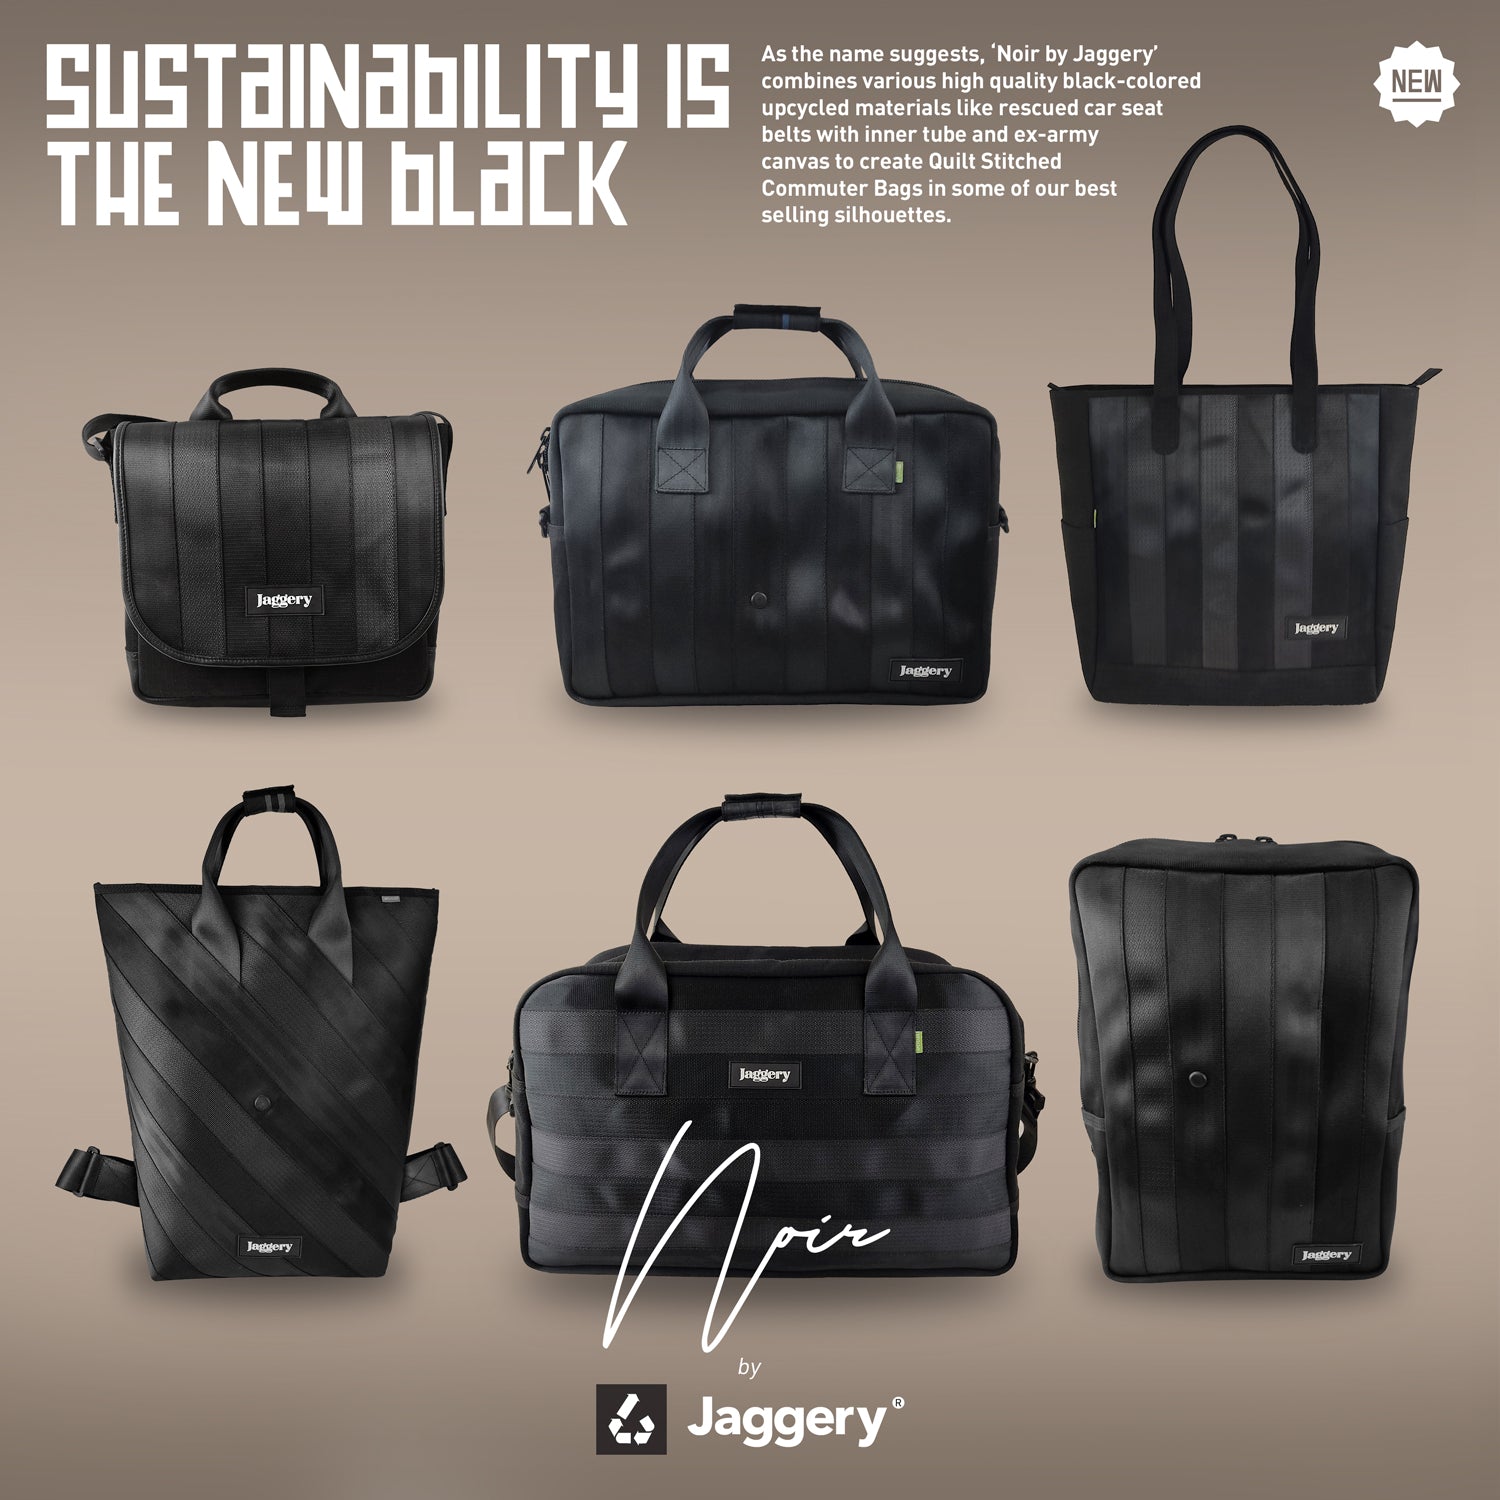 Noir by Jaggery: Sustainability is the New Black